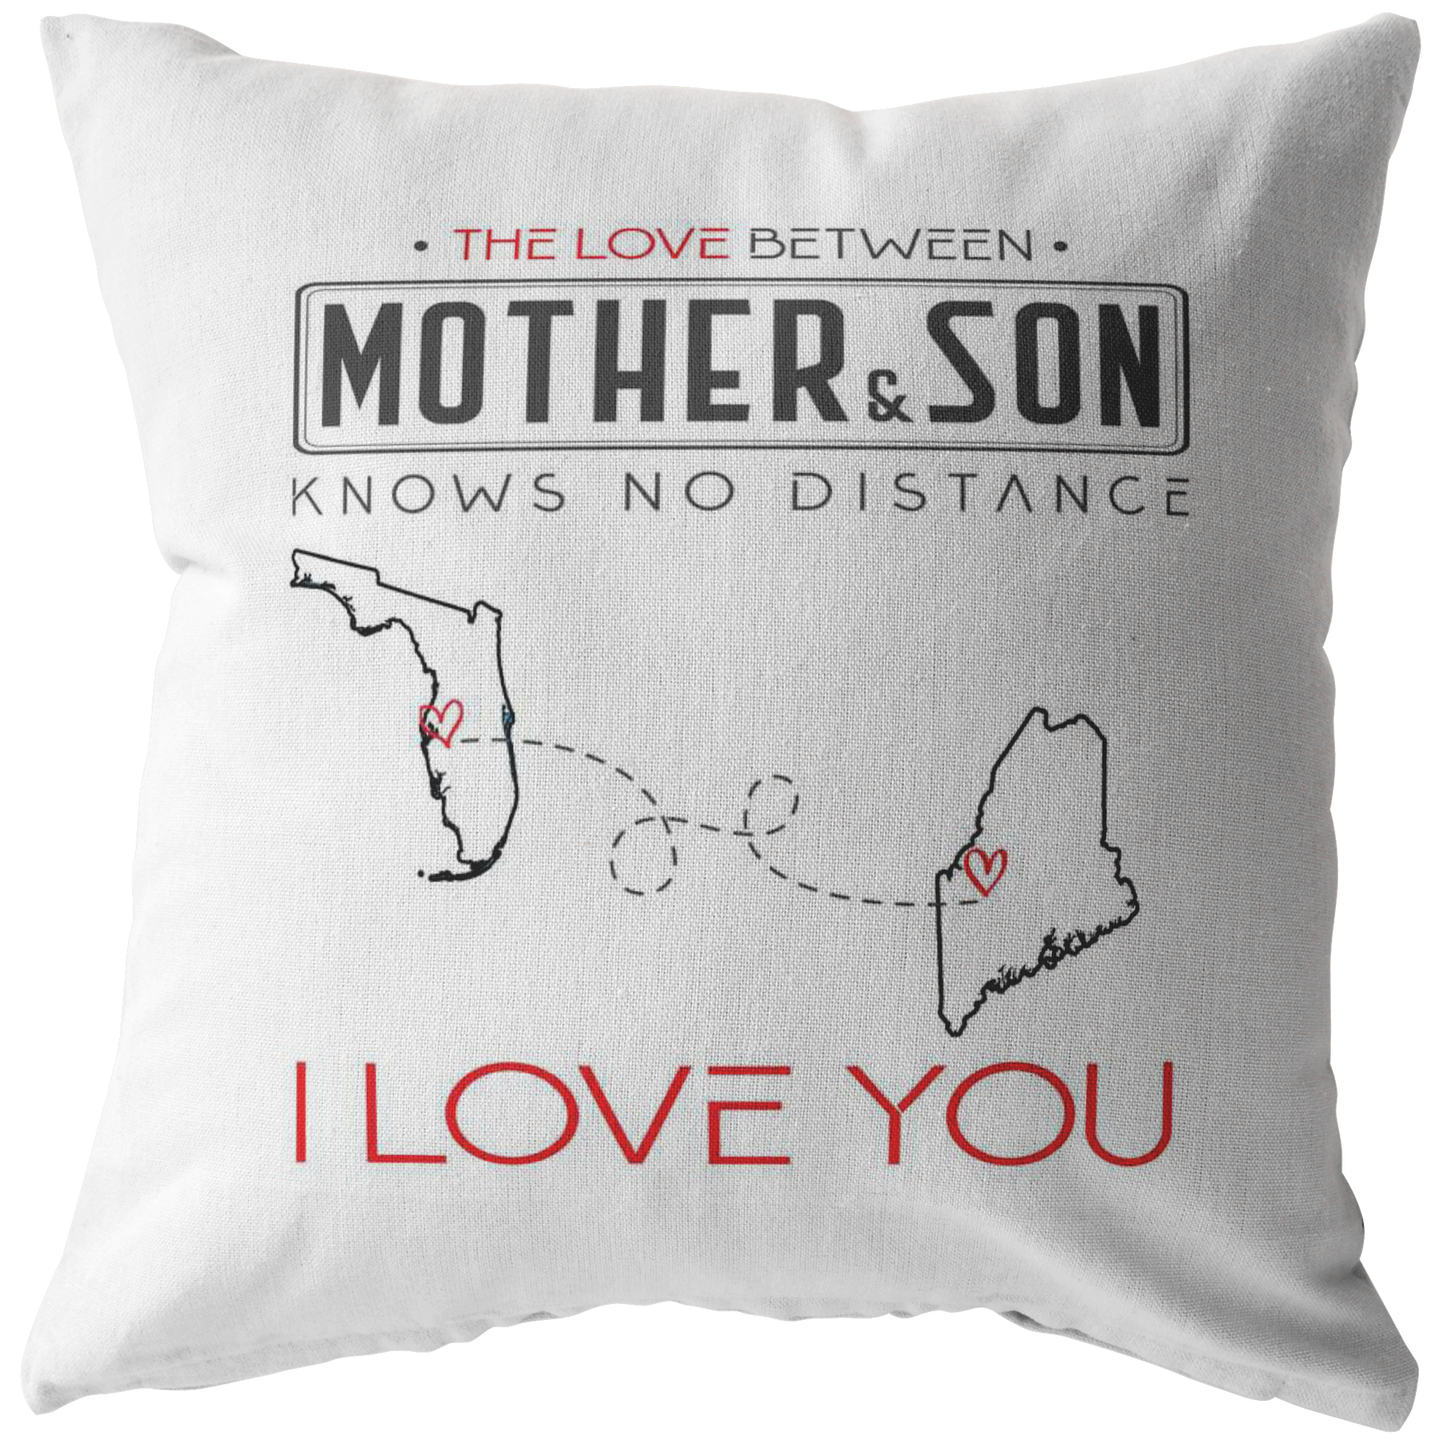 ND-pl20419747-sp-23467 - The Love Between Mother  Son Knows No Distance Florida Stat